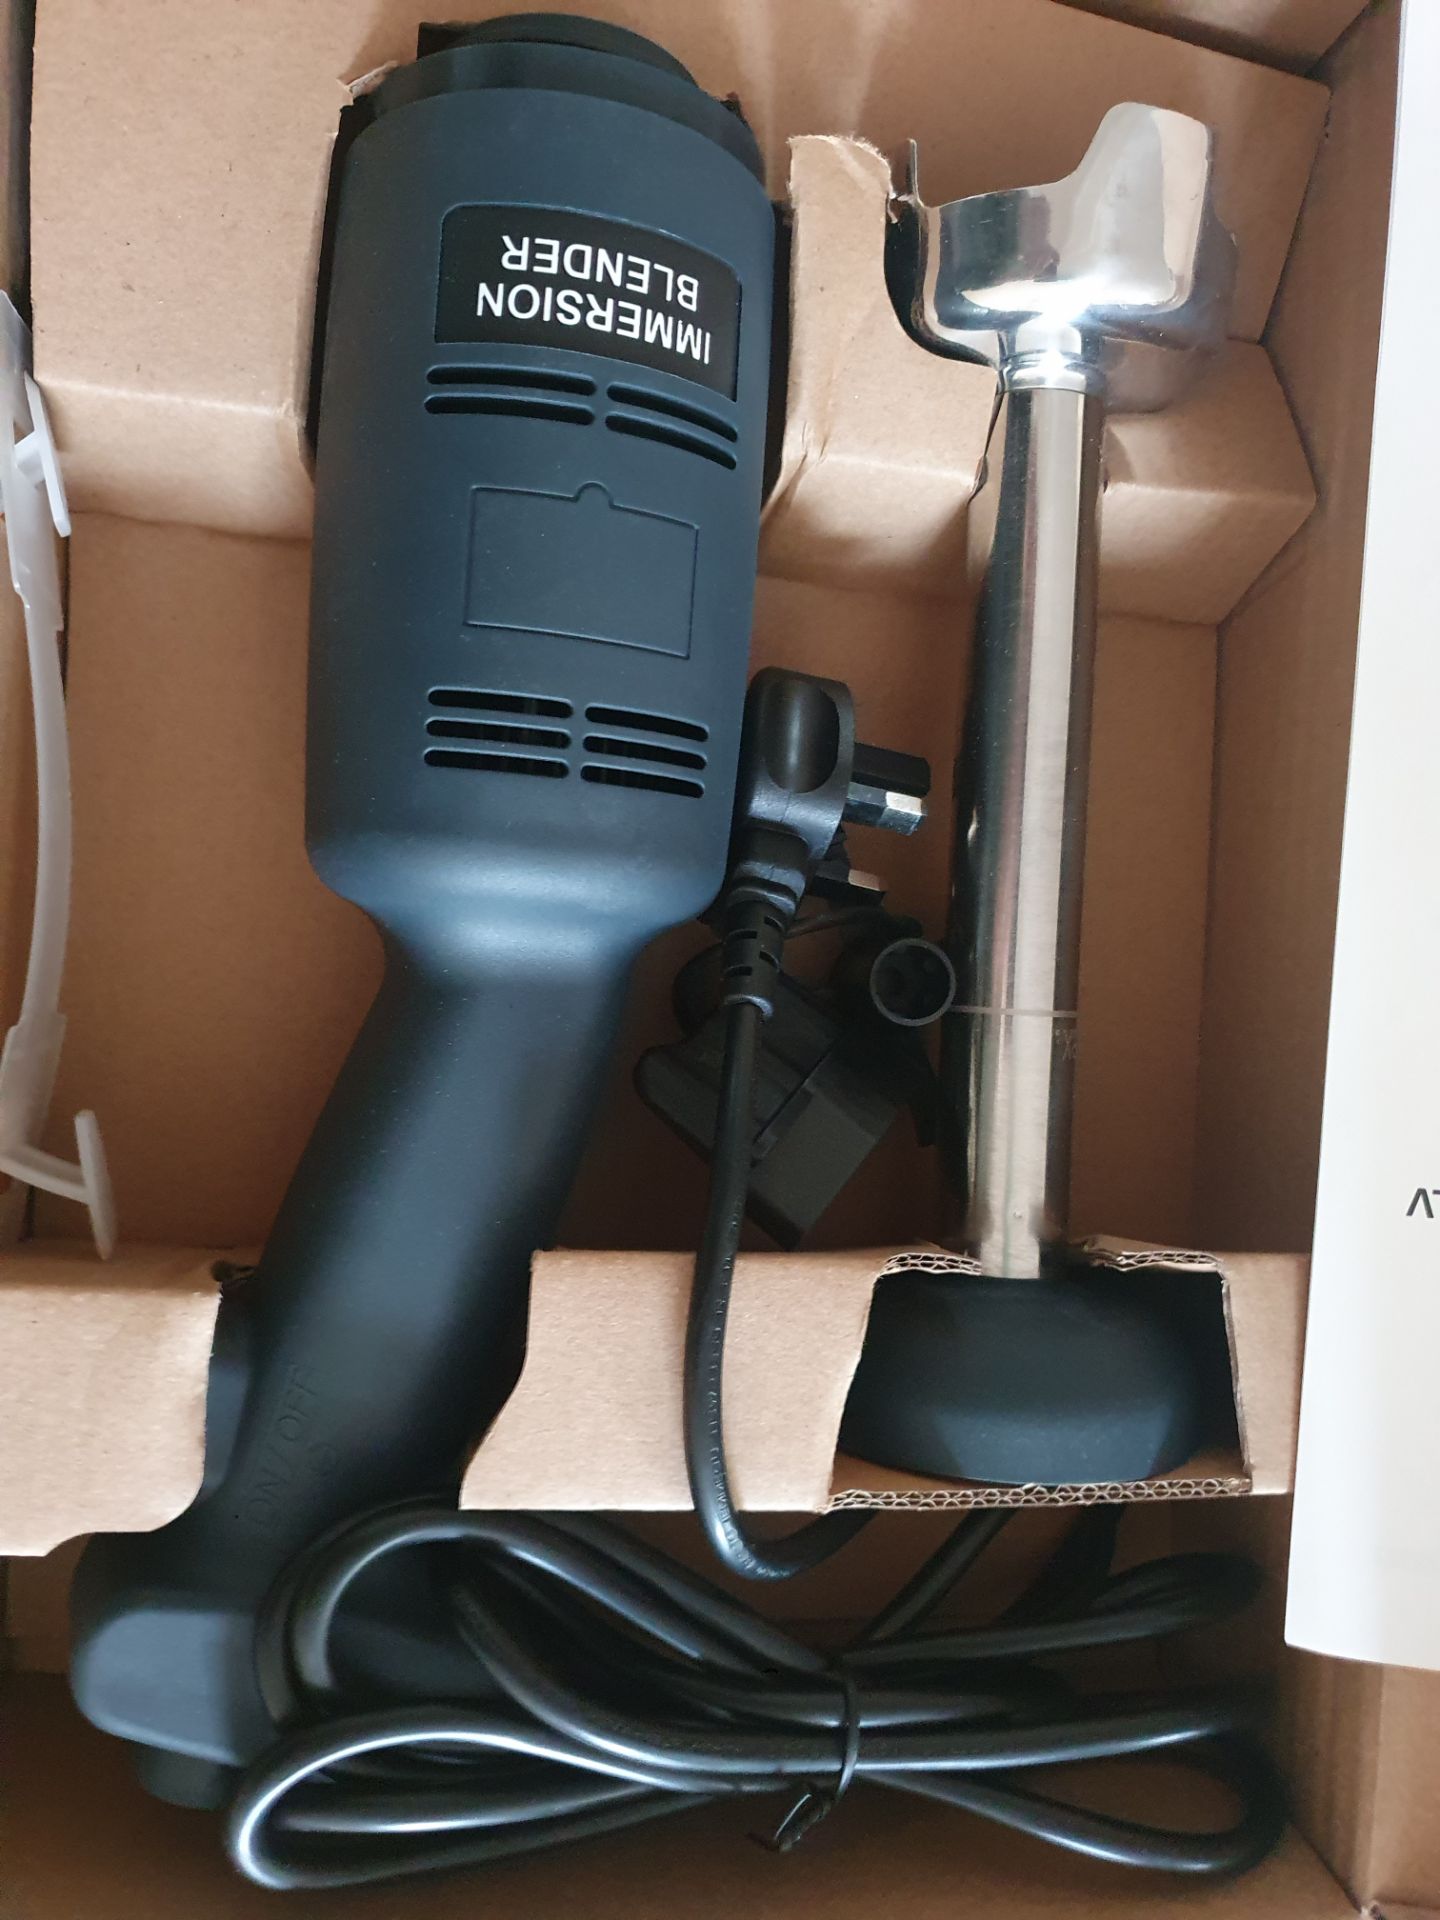 Immersion Blender With Interchangeable Blades - Image 5 of 5